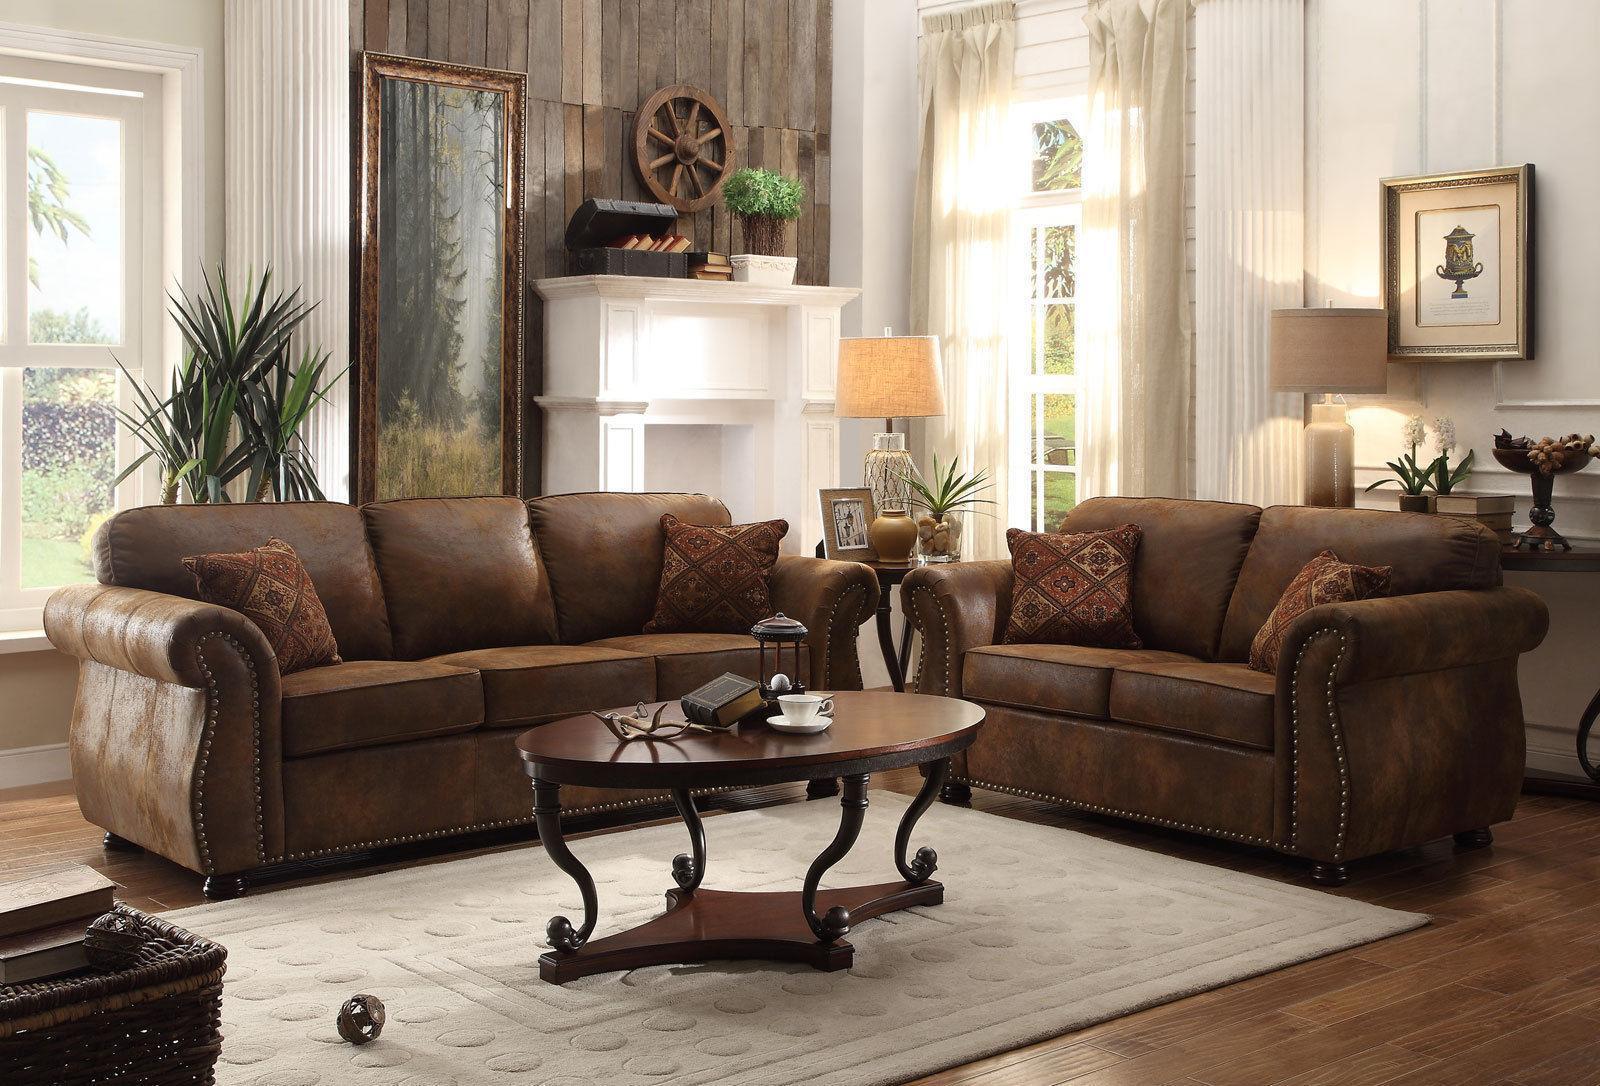 Rustic Living Room With Brown Leather Couch